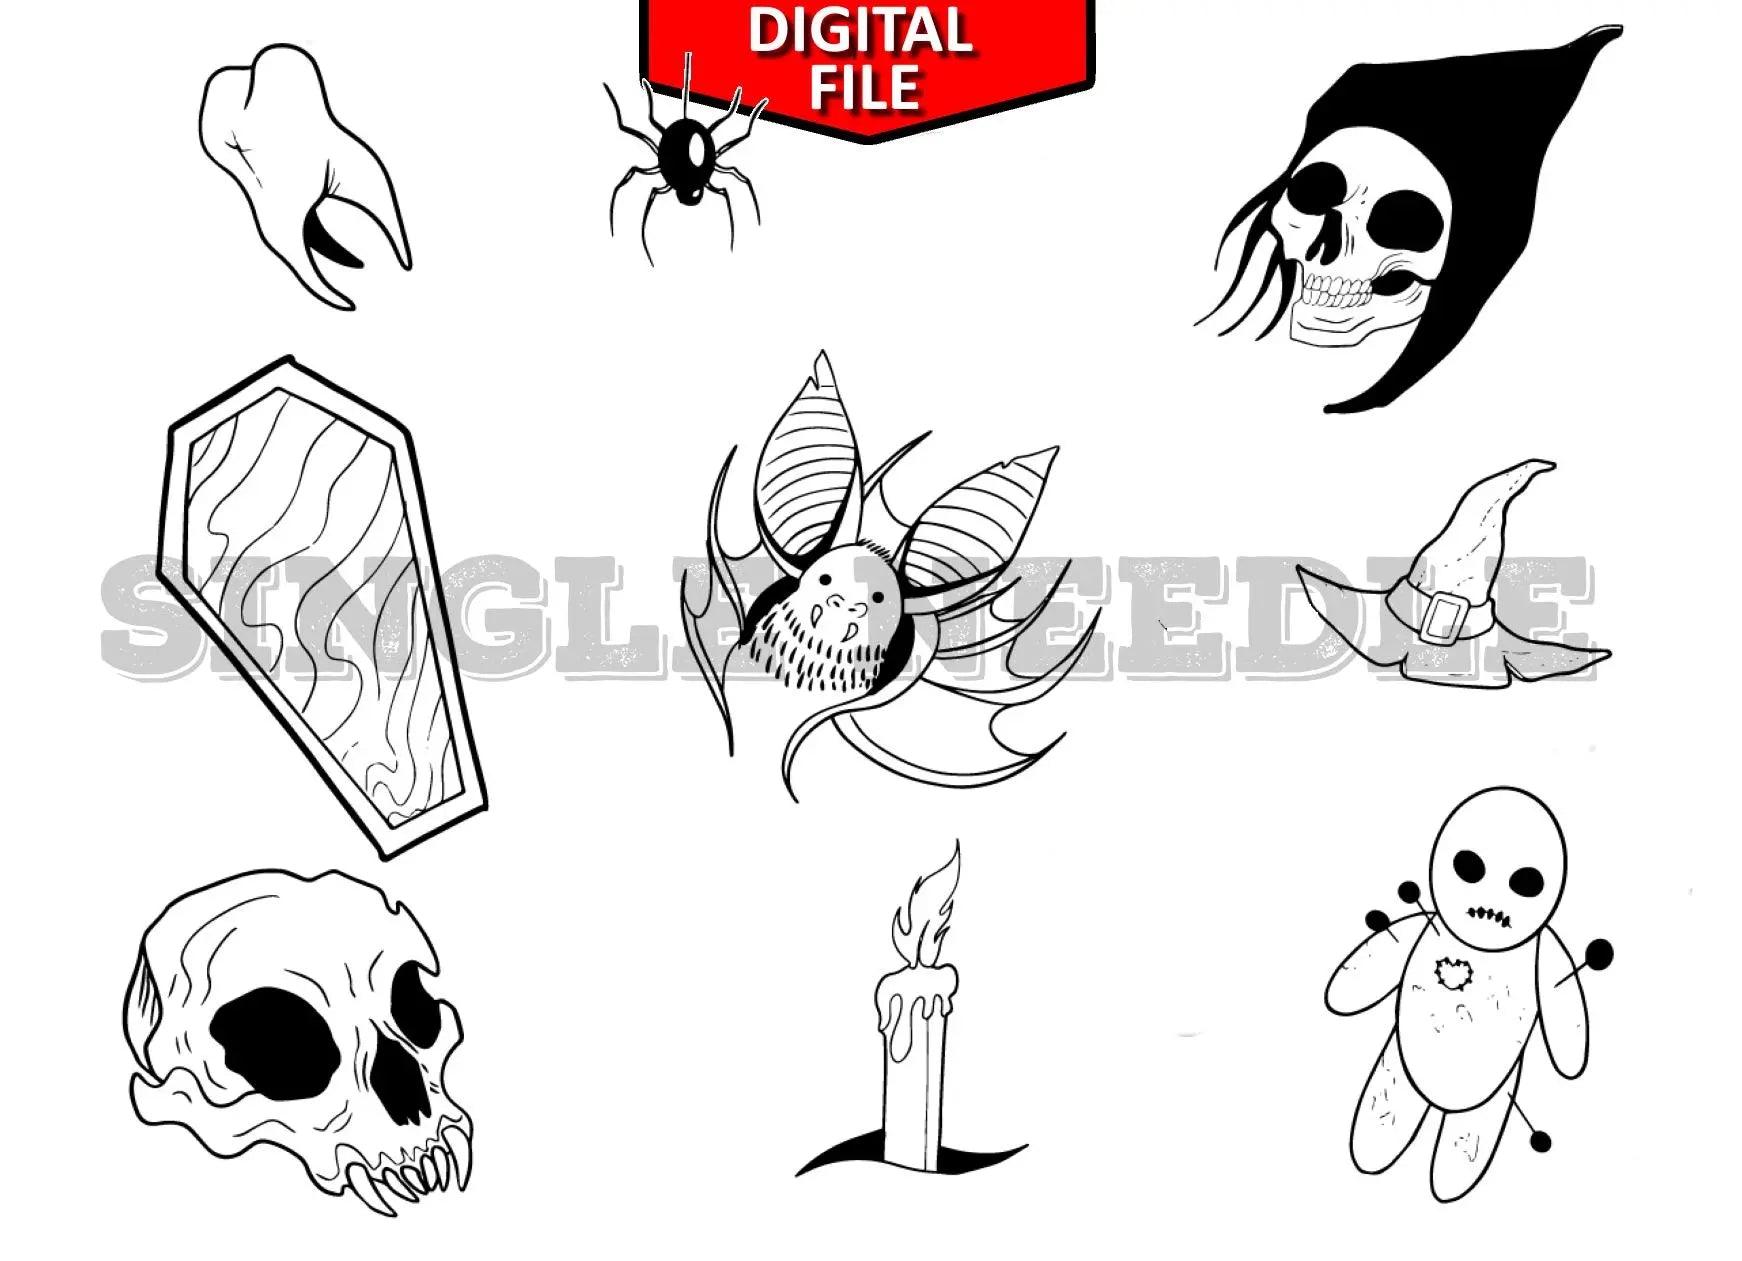 260 Flash Designs - Tattoo Flash Sheet Stencil for Real Stick and Poke Tattoos - SINGLE NEEDLE